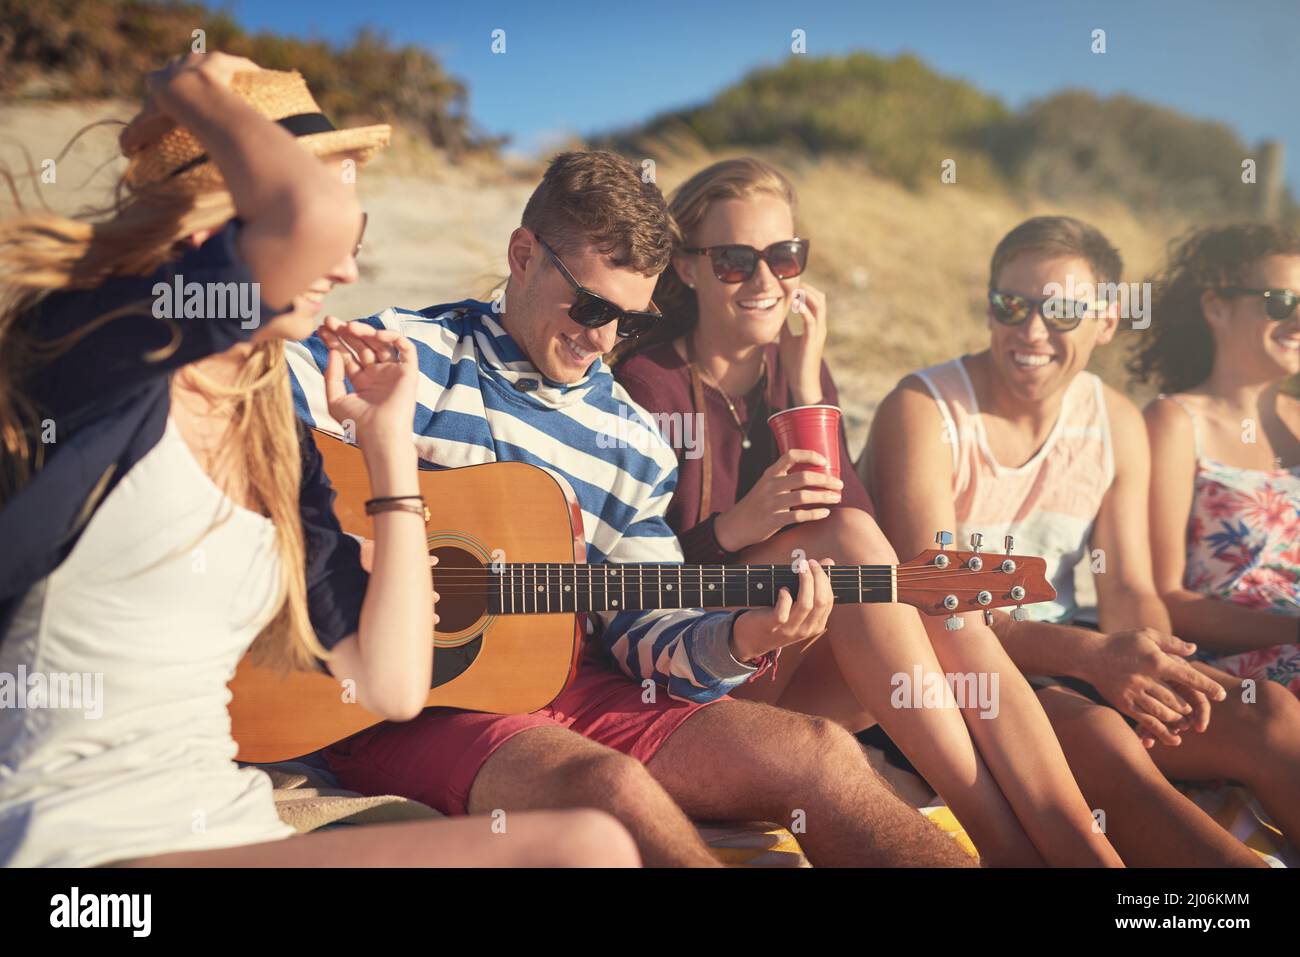 His music brings them happiness. Cropped shot of a handsome young man playing a guitar for his friends on a summers day at the beach. Stock Photo